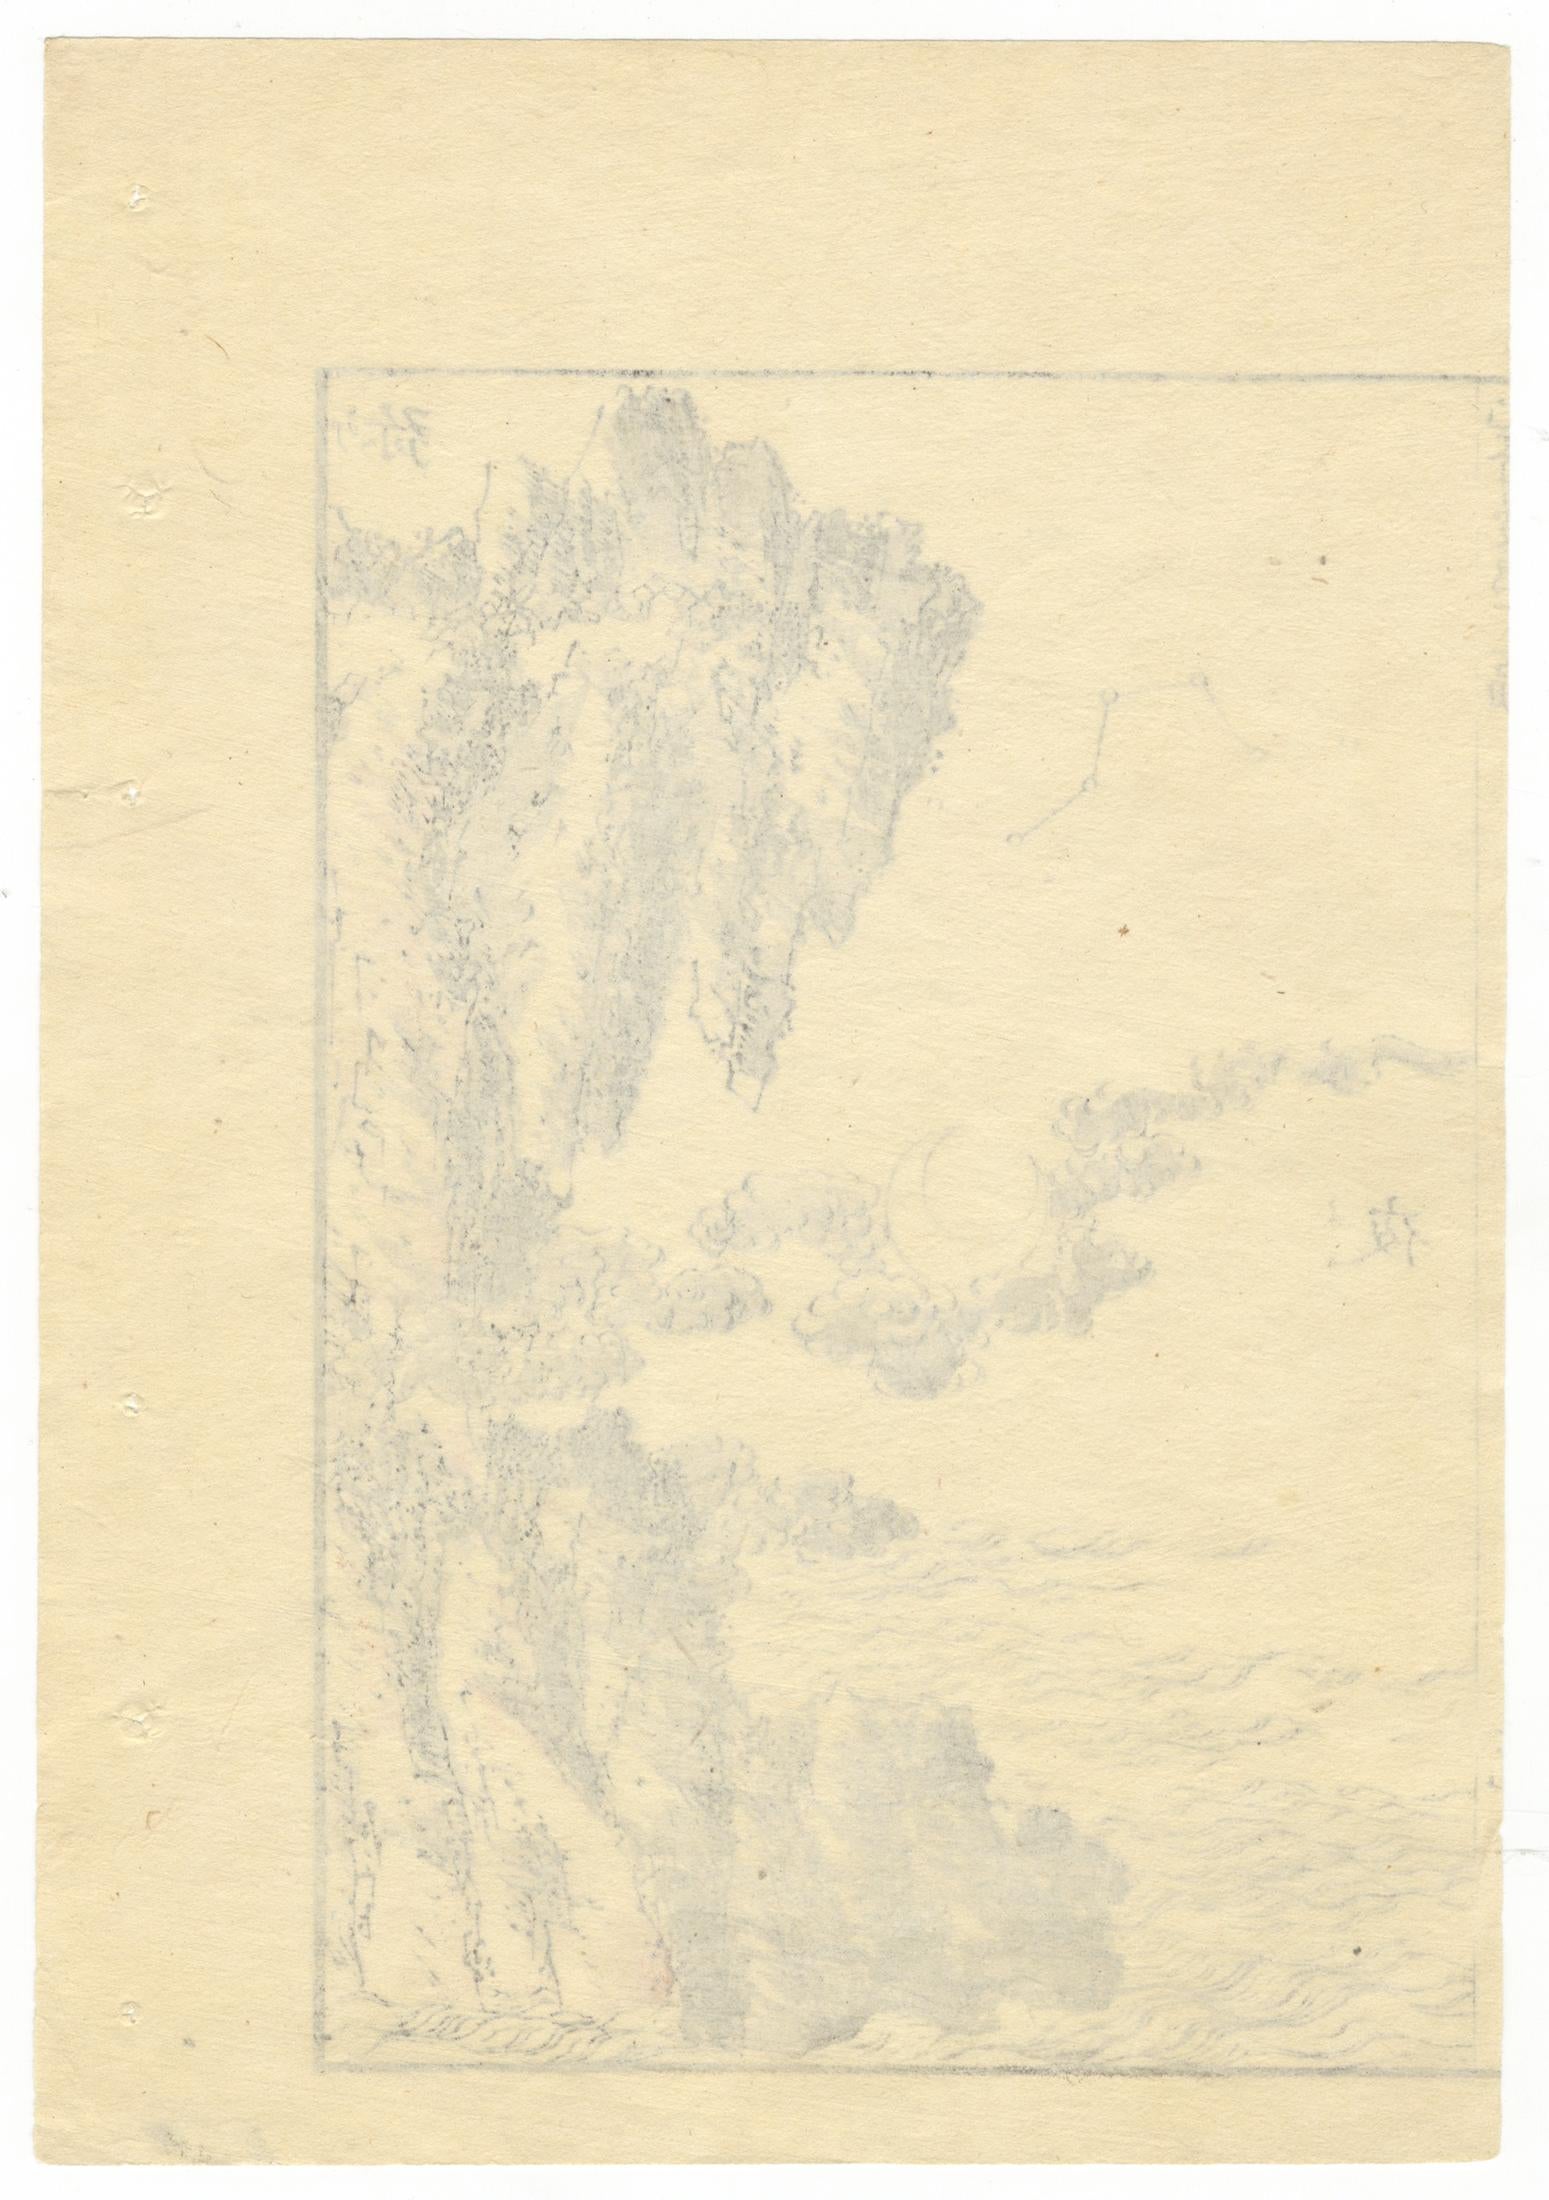 Artist: Katsushika Hokusai (1760 - 1849)
Title: Big Dipper 
Series: Hokusai Manga Volume 13
Publisher: Toheki-do
Date: 1878
Size: 22.6 cm x 15.1 cm
Condition report: Trimmed on the left side, binding marks on the right, ink stain at the